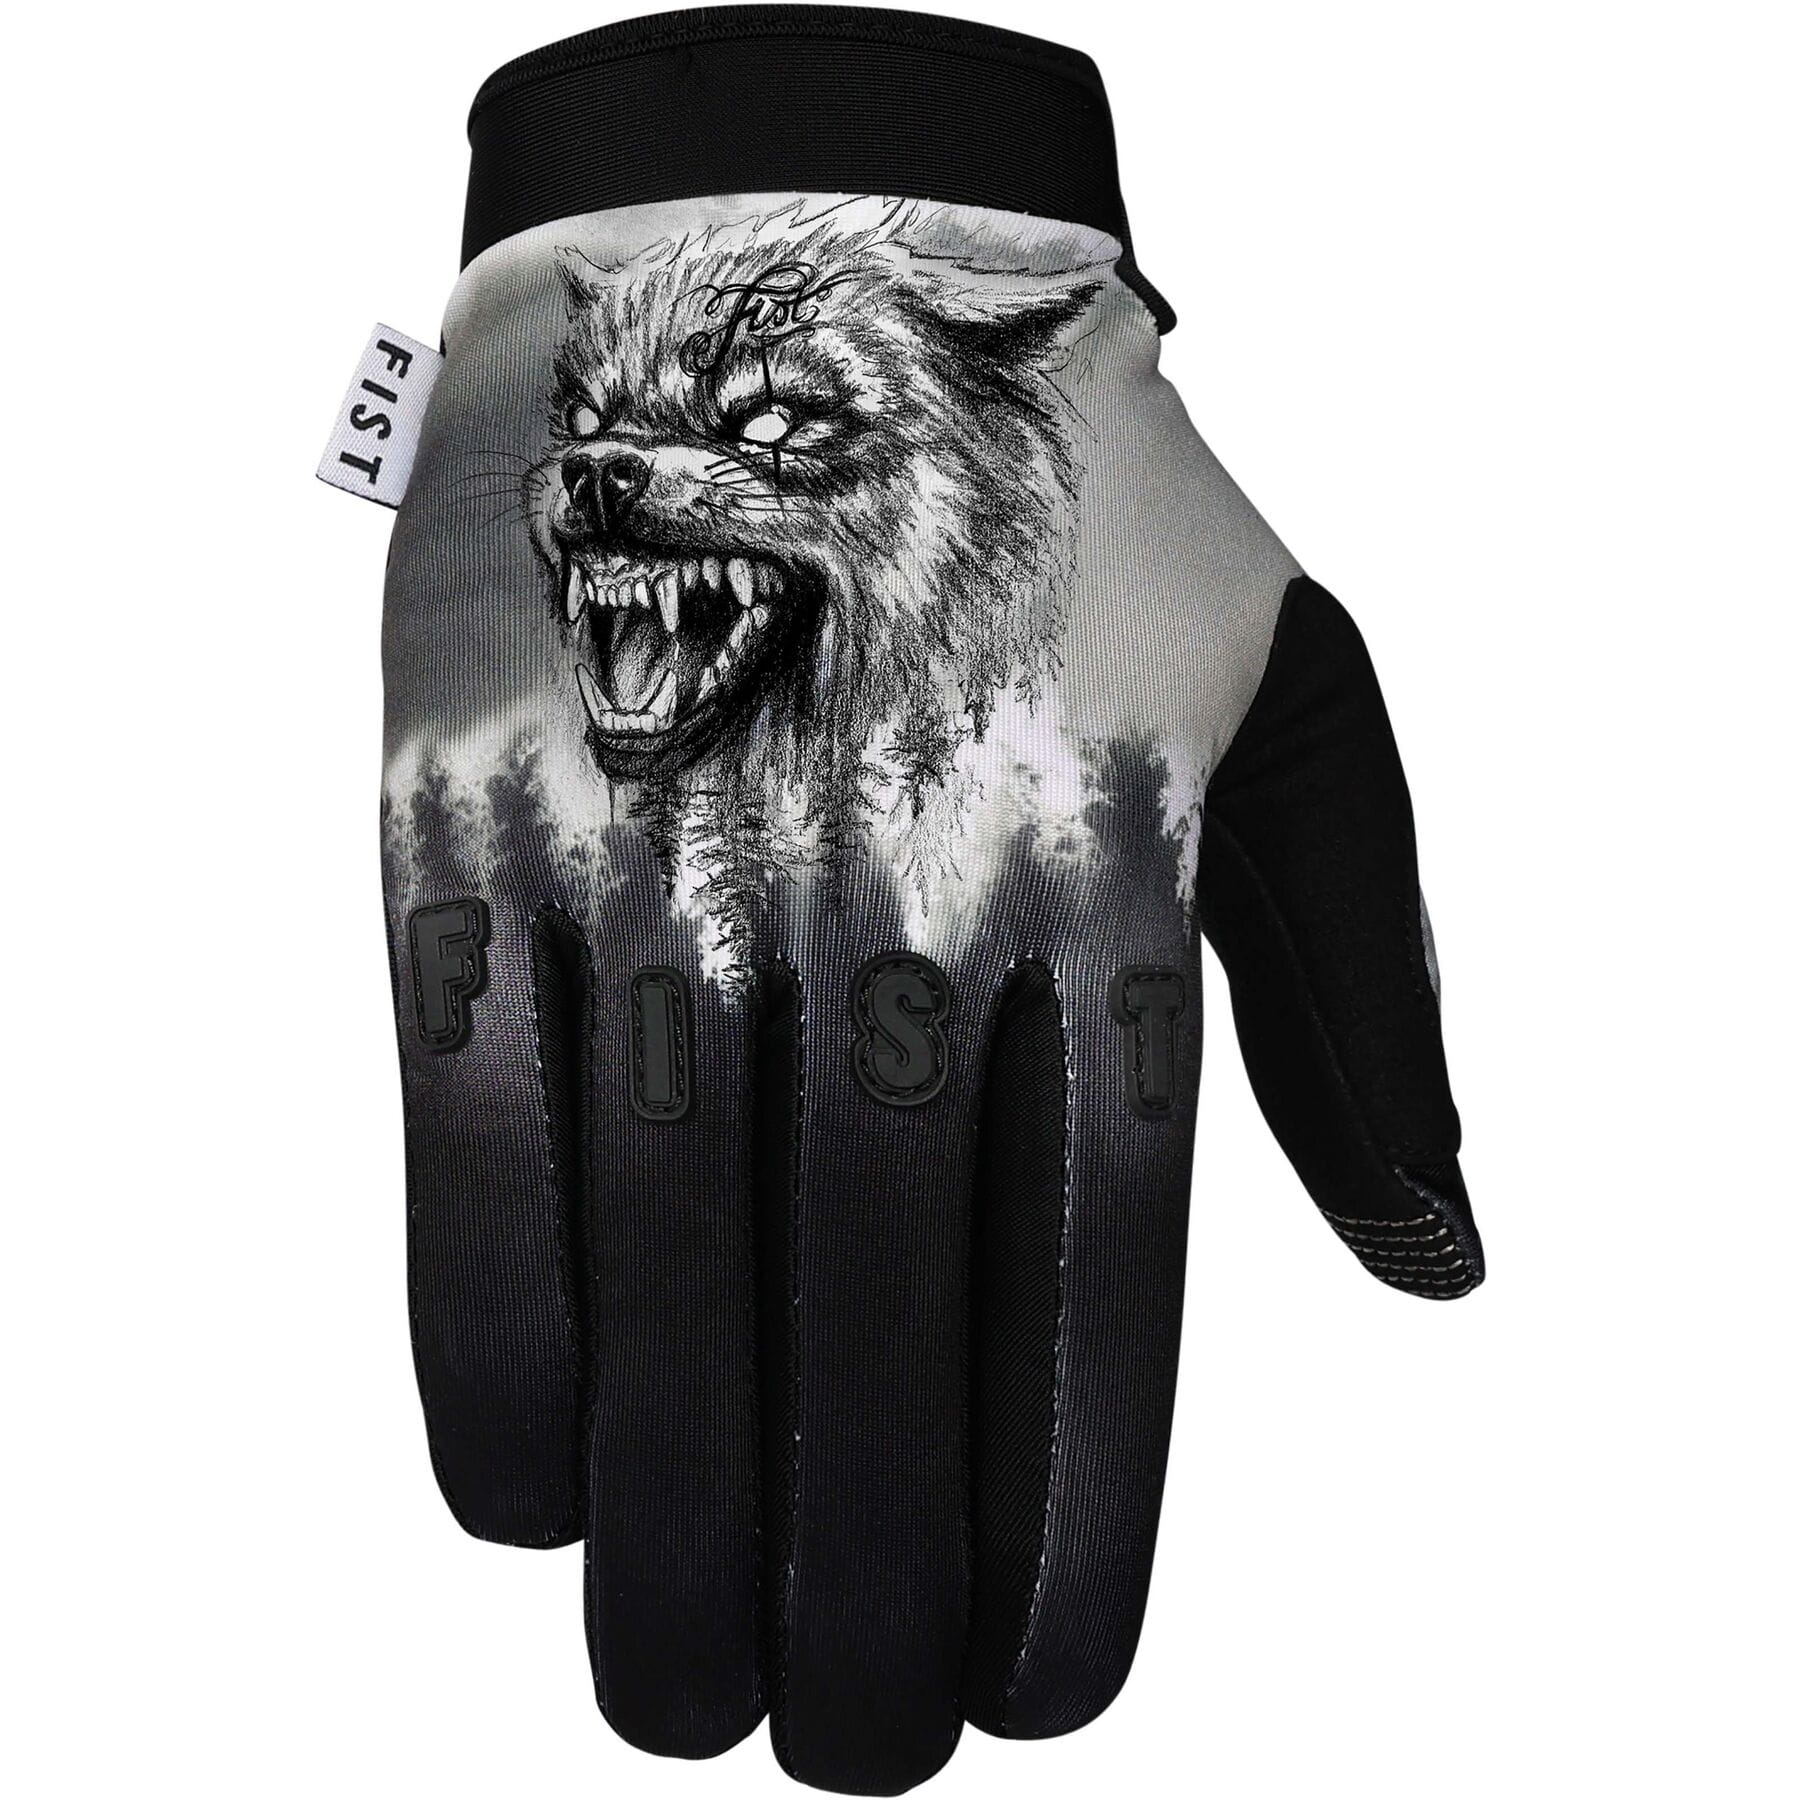 Wolf-themed winter gloves from the Chapter 20 Collection - Frosty Fingers design